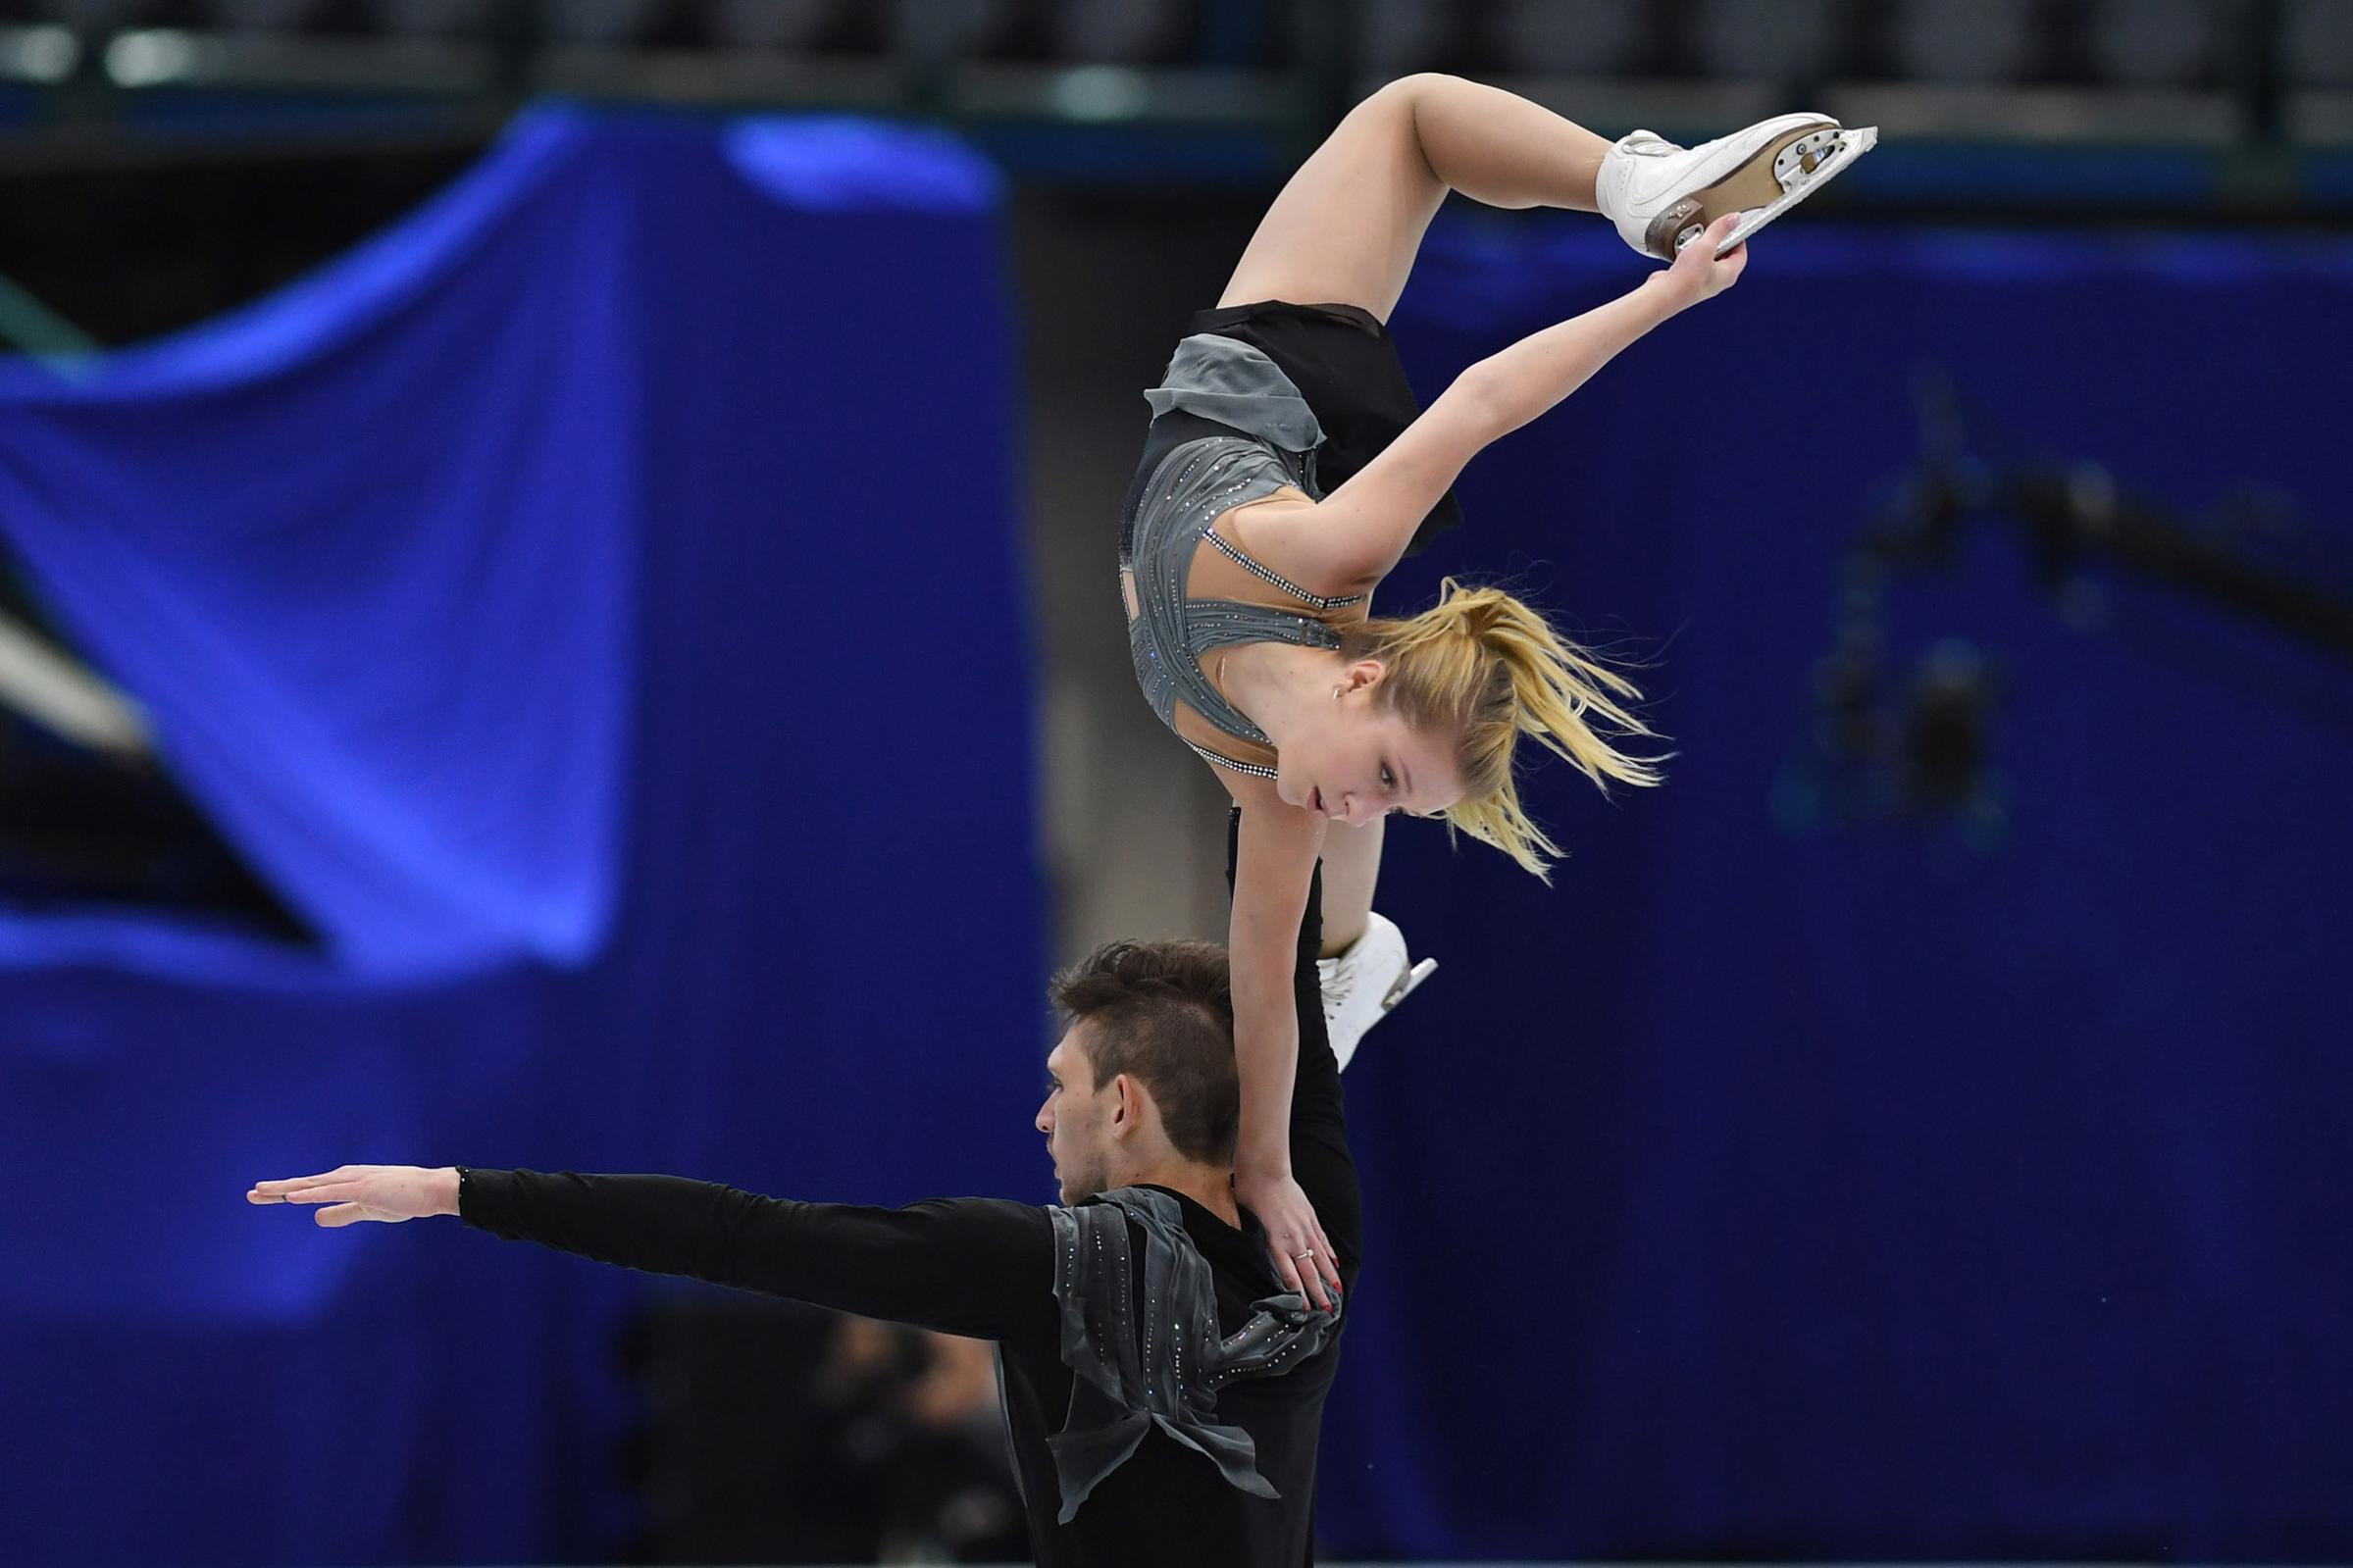 Ekaterina Alexandrovsakaya and Harley Windsor of Australia compete in the pairs short program during the Four Continents Figure Skating Championships at Taipei Arena in Taipei, Taiwan, on Jan. 24, 2018.